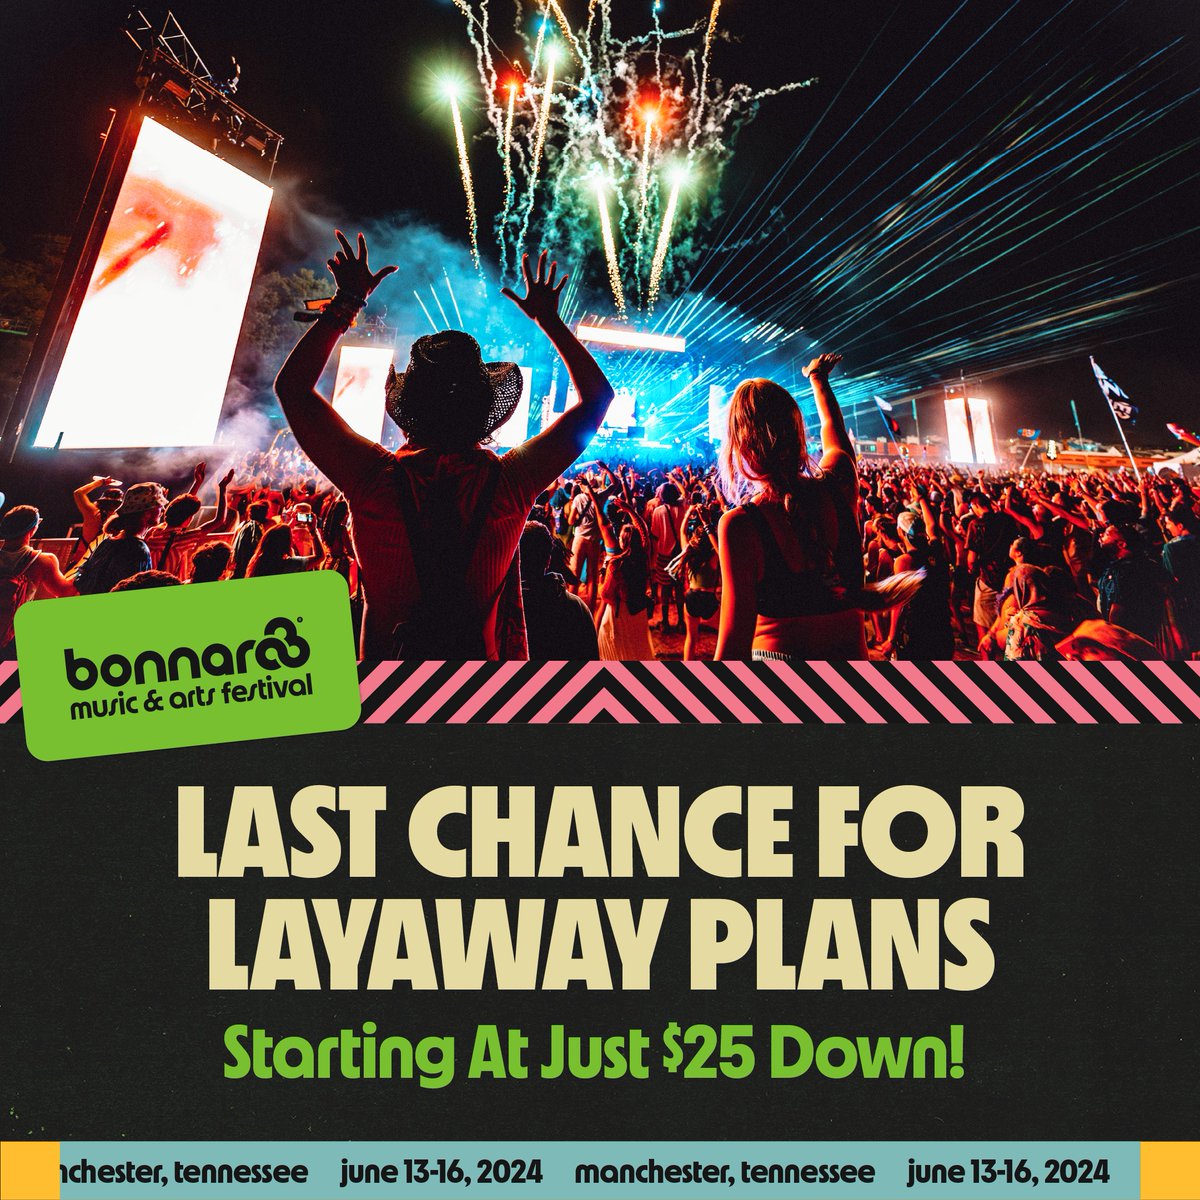 layaway plans flip to 50% down this friday, 3/22 @ 11:59pm CT ☝️ guarantee a spot on the farm today & pay as you go!! bonnaroo.com